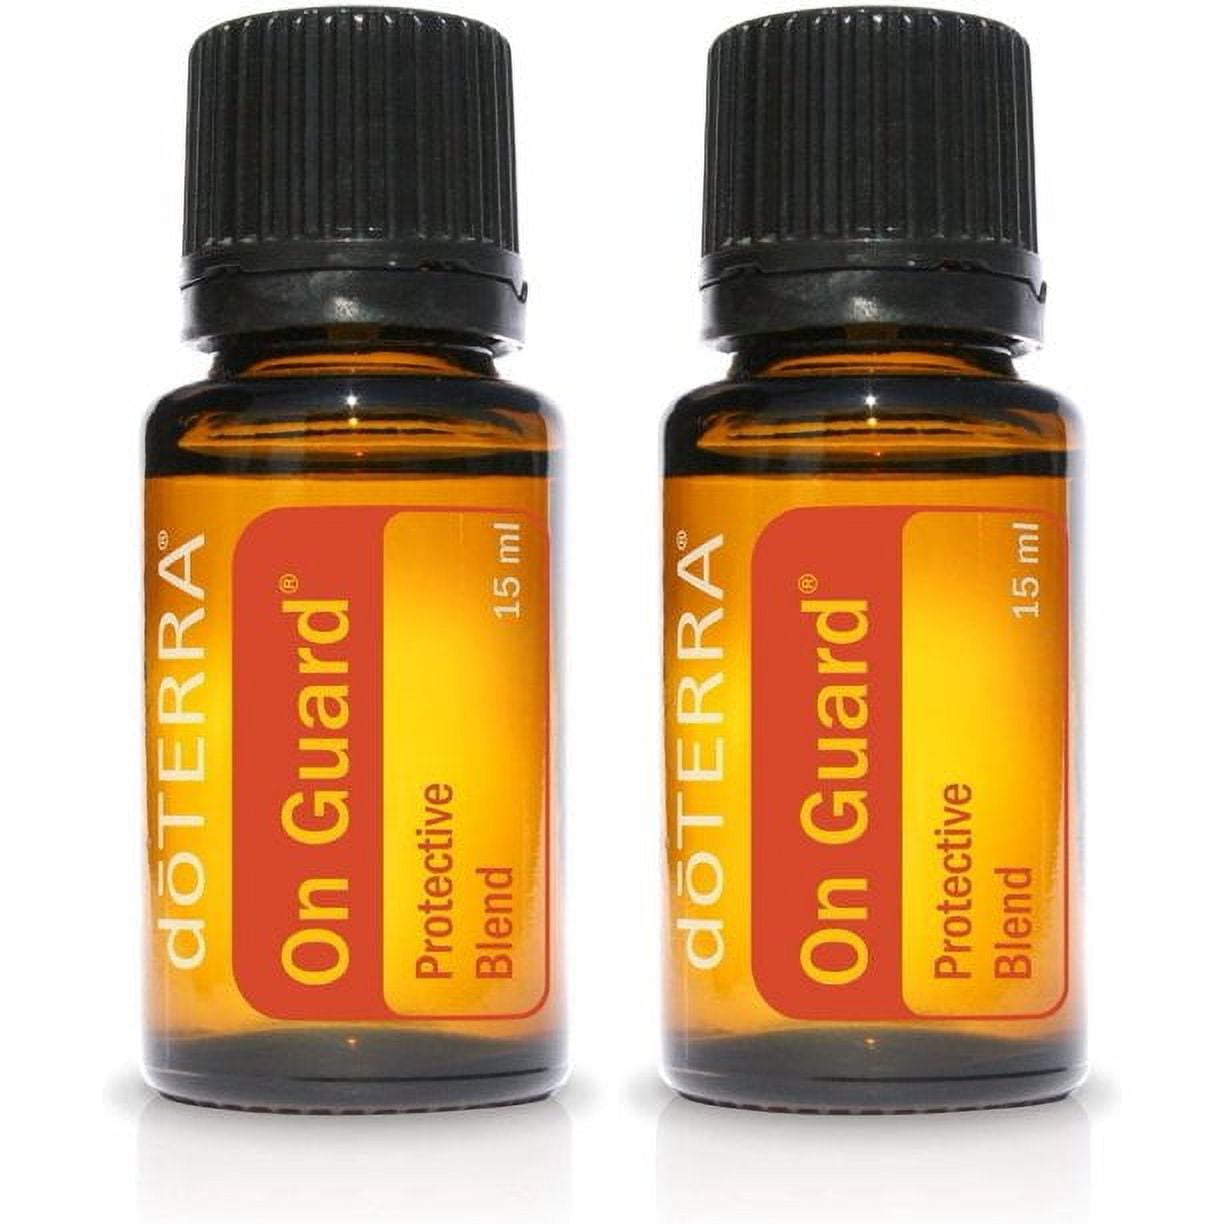 doTERRA On Guard Product Line (Choose your product) – Tacos Y Mas